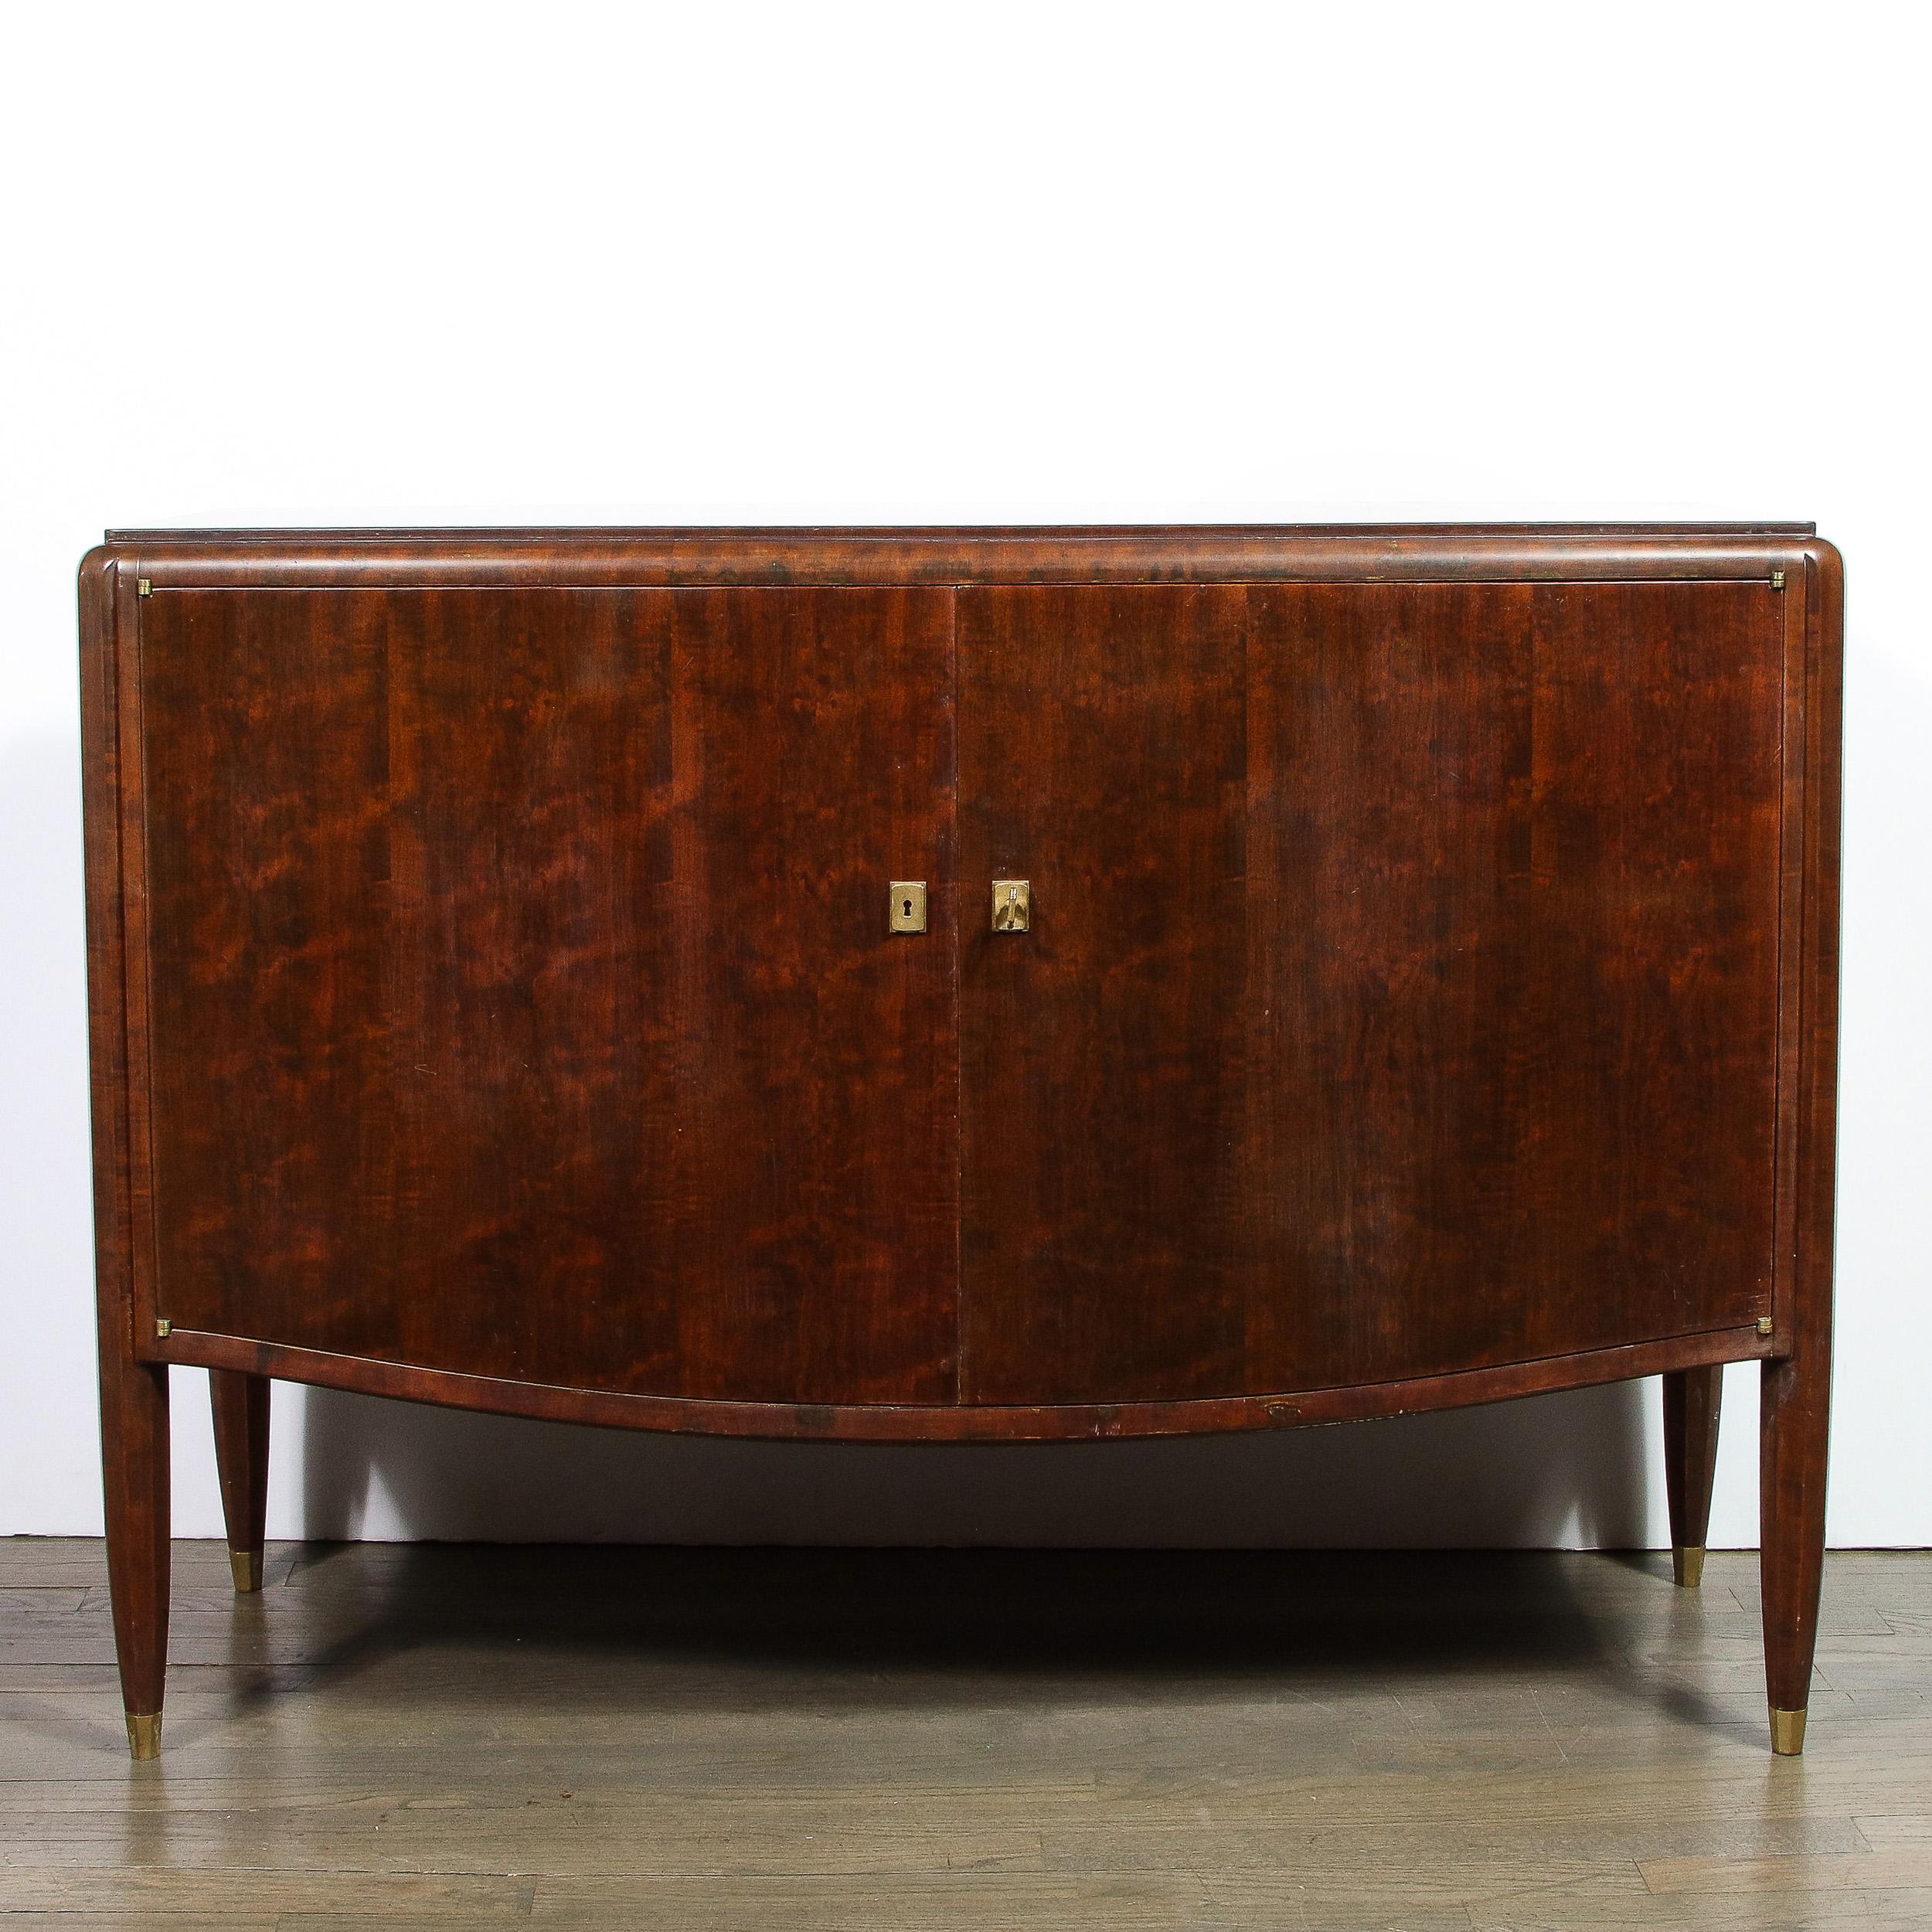 This elegant Art Deco directoire style cabinet was realized in France by the celebrated designer, Jules Leleu, circa 1940. It features a volumetric rectangular body with an undulating curved apron, as well as faceted tapered legs sitting on bronze